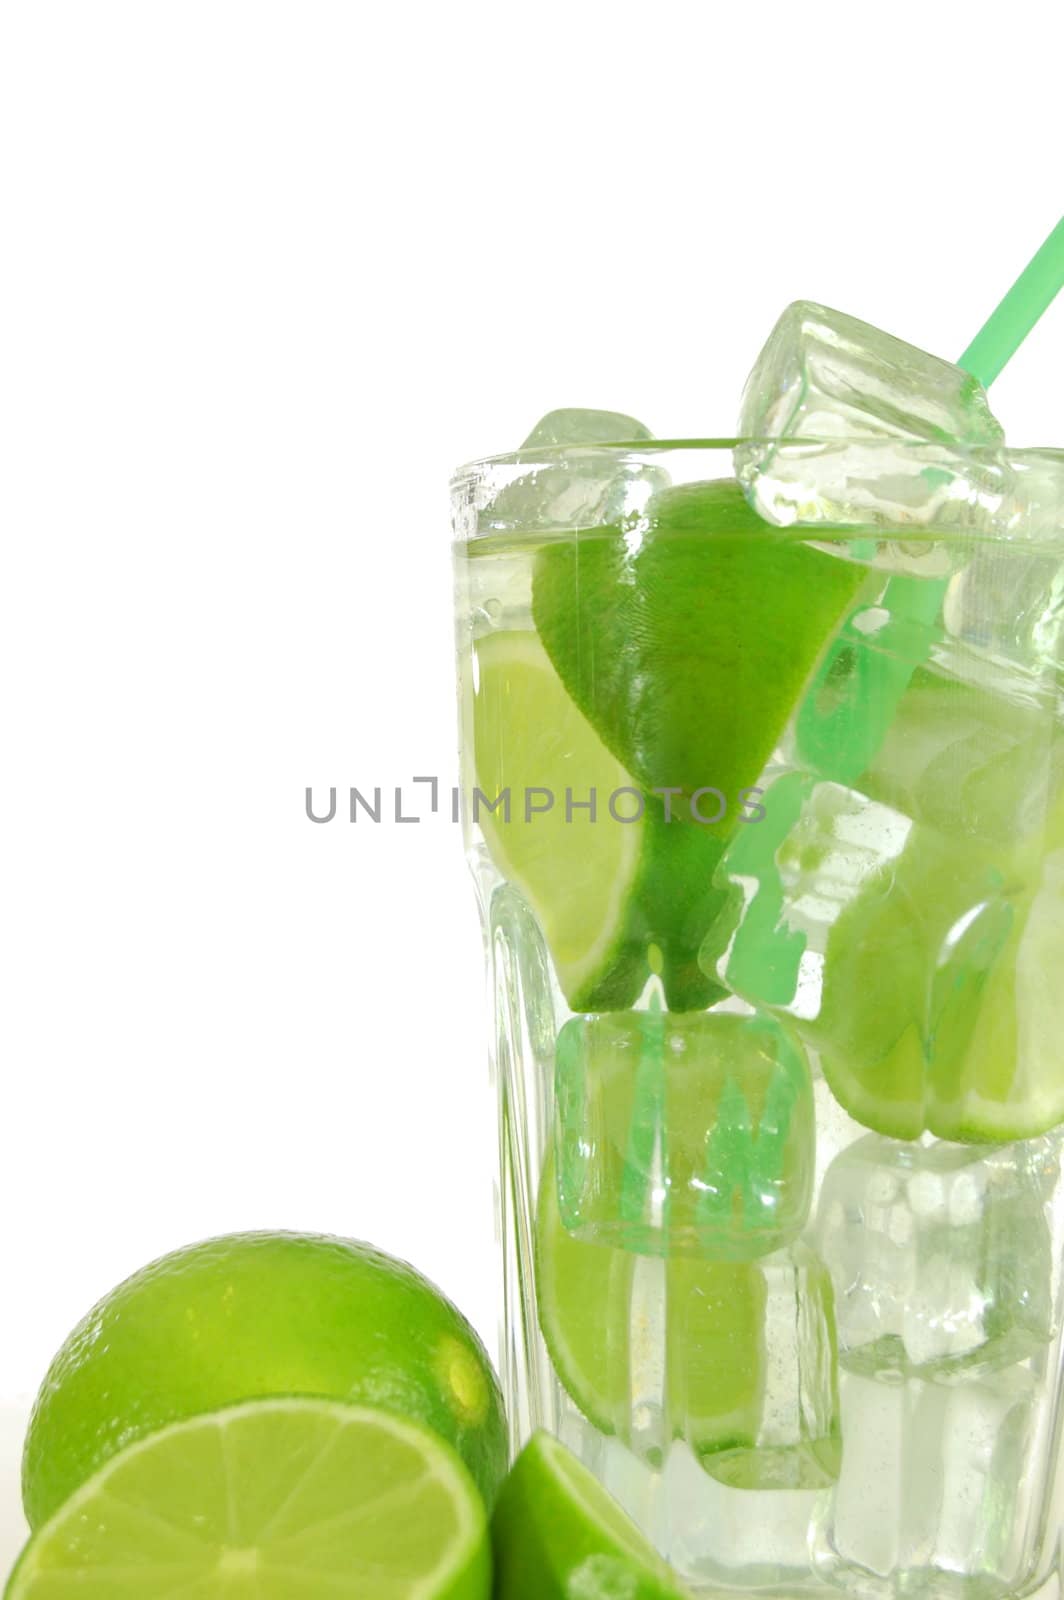 green cocktail with ice cubes and copyspace